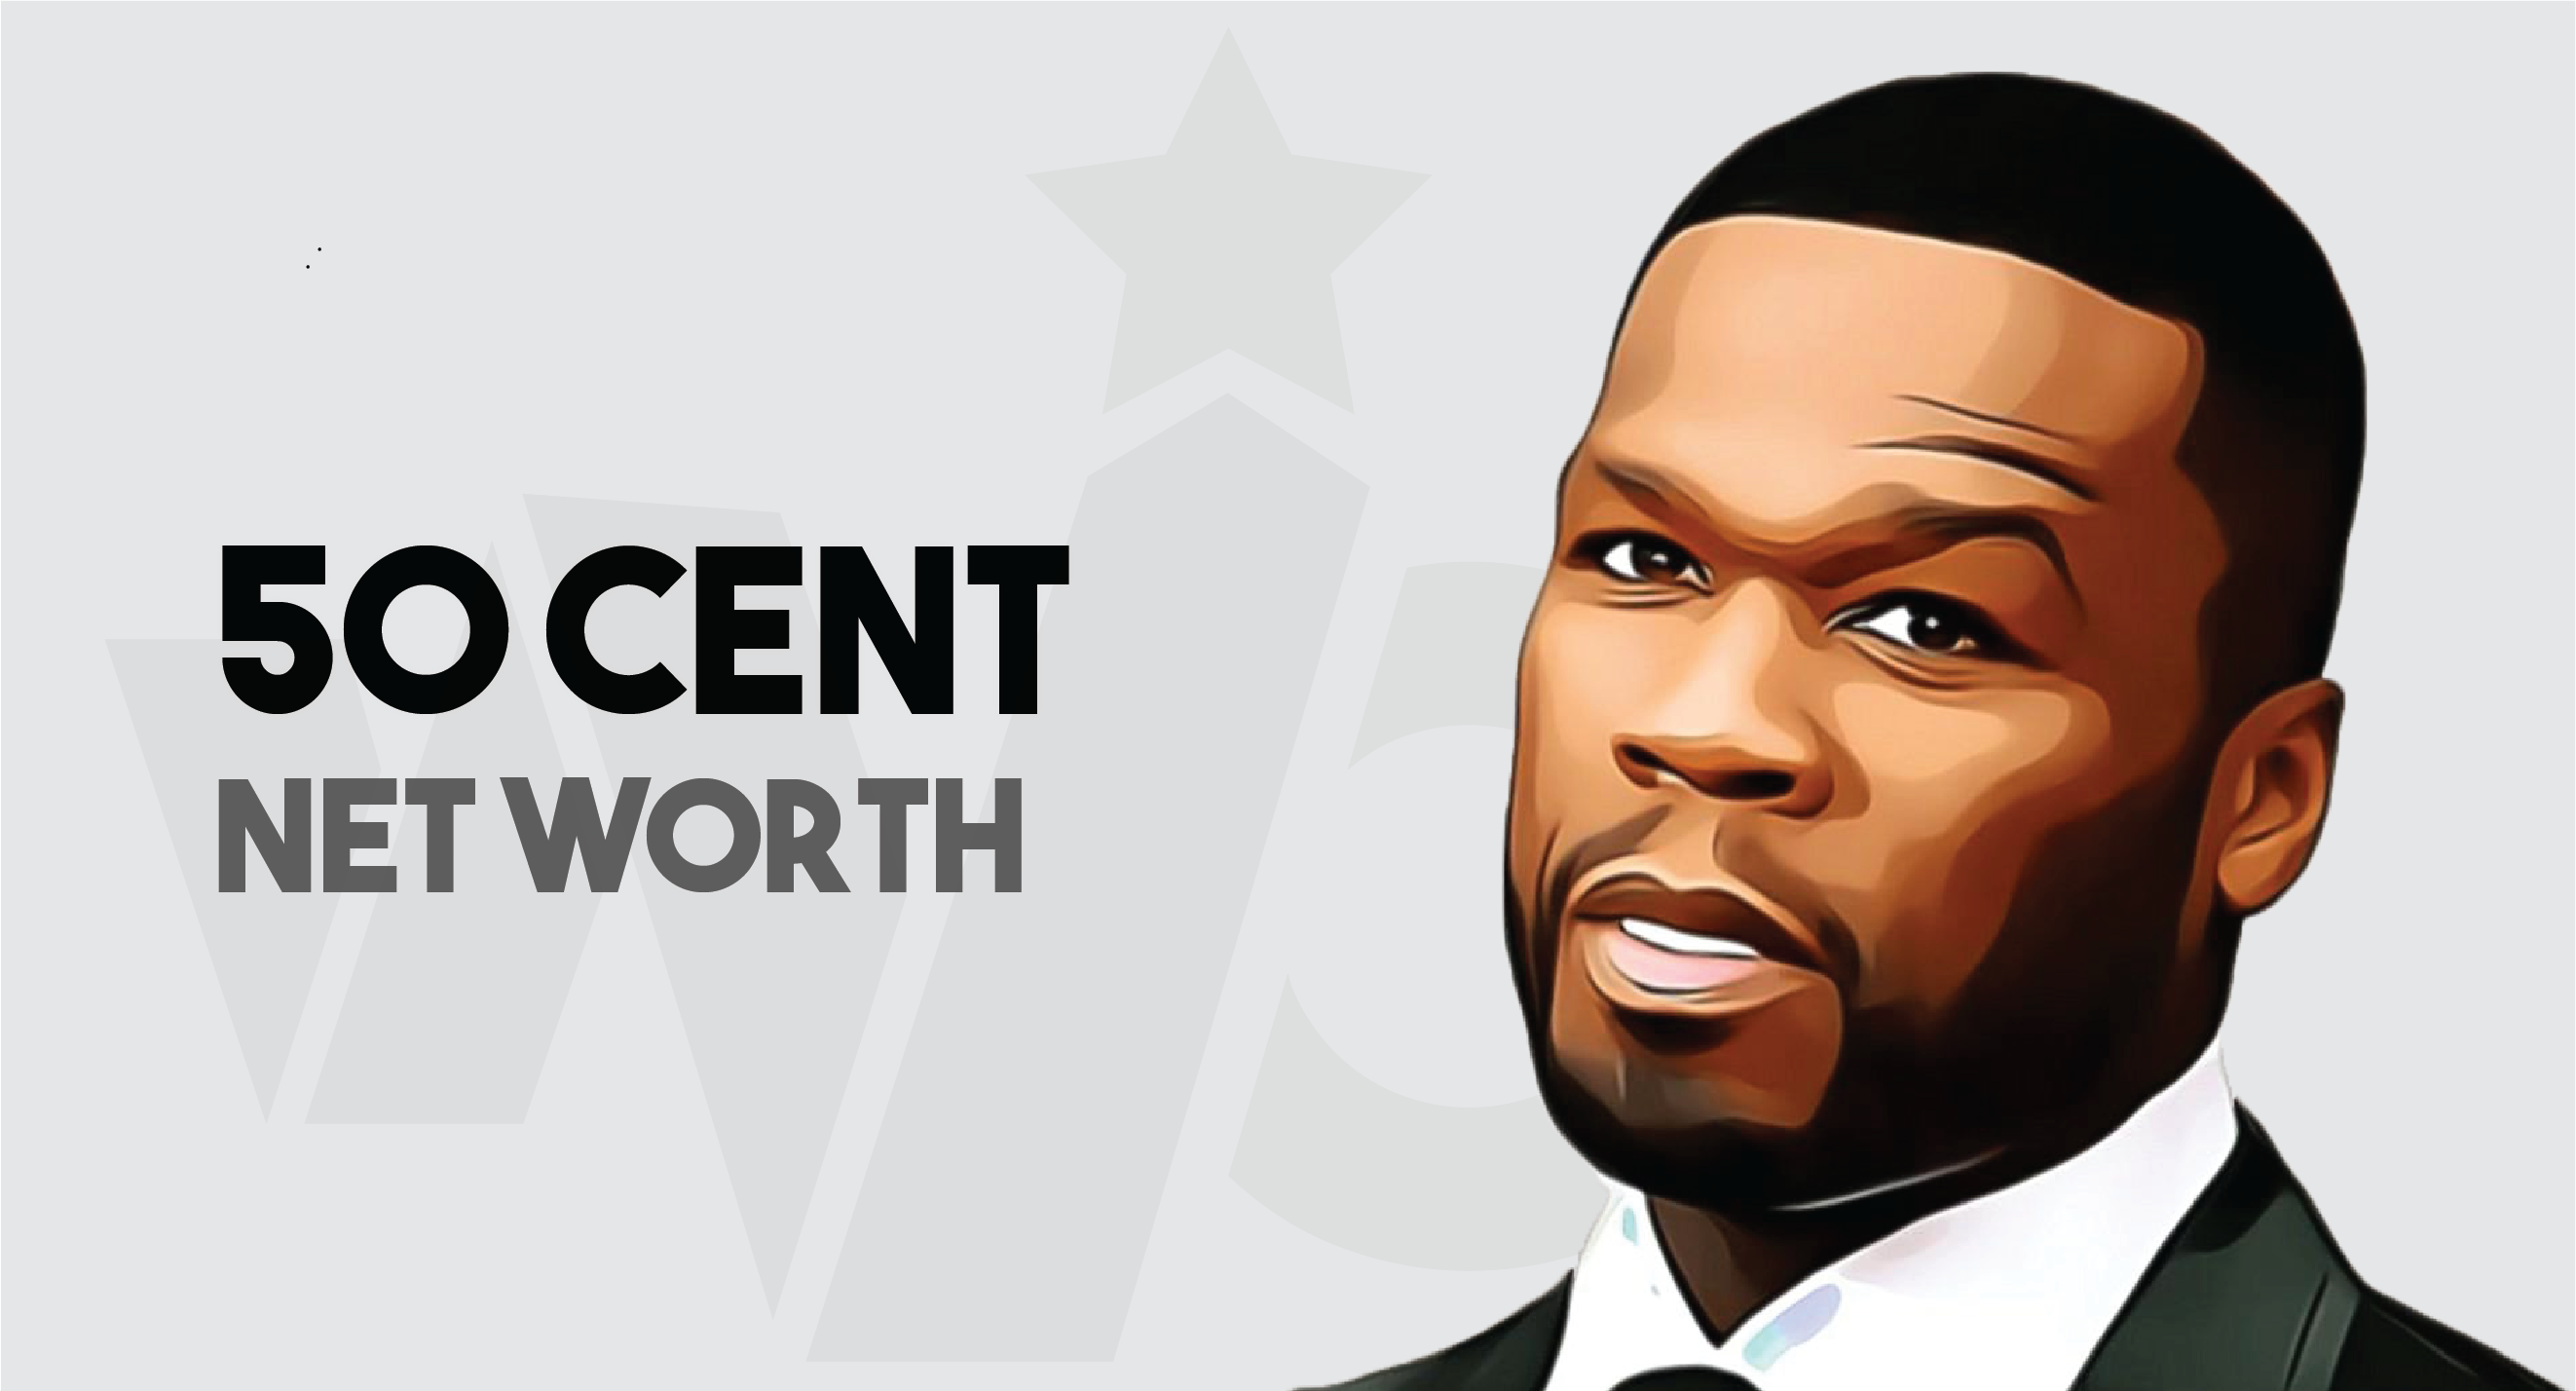 What’s 50 Cent’s Net Worth Actually? Get To Know His Earnings, Super Bowl Performance, And All About His Life